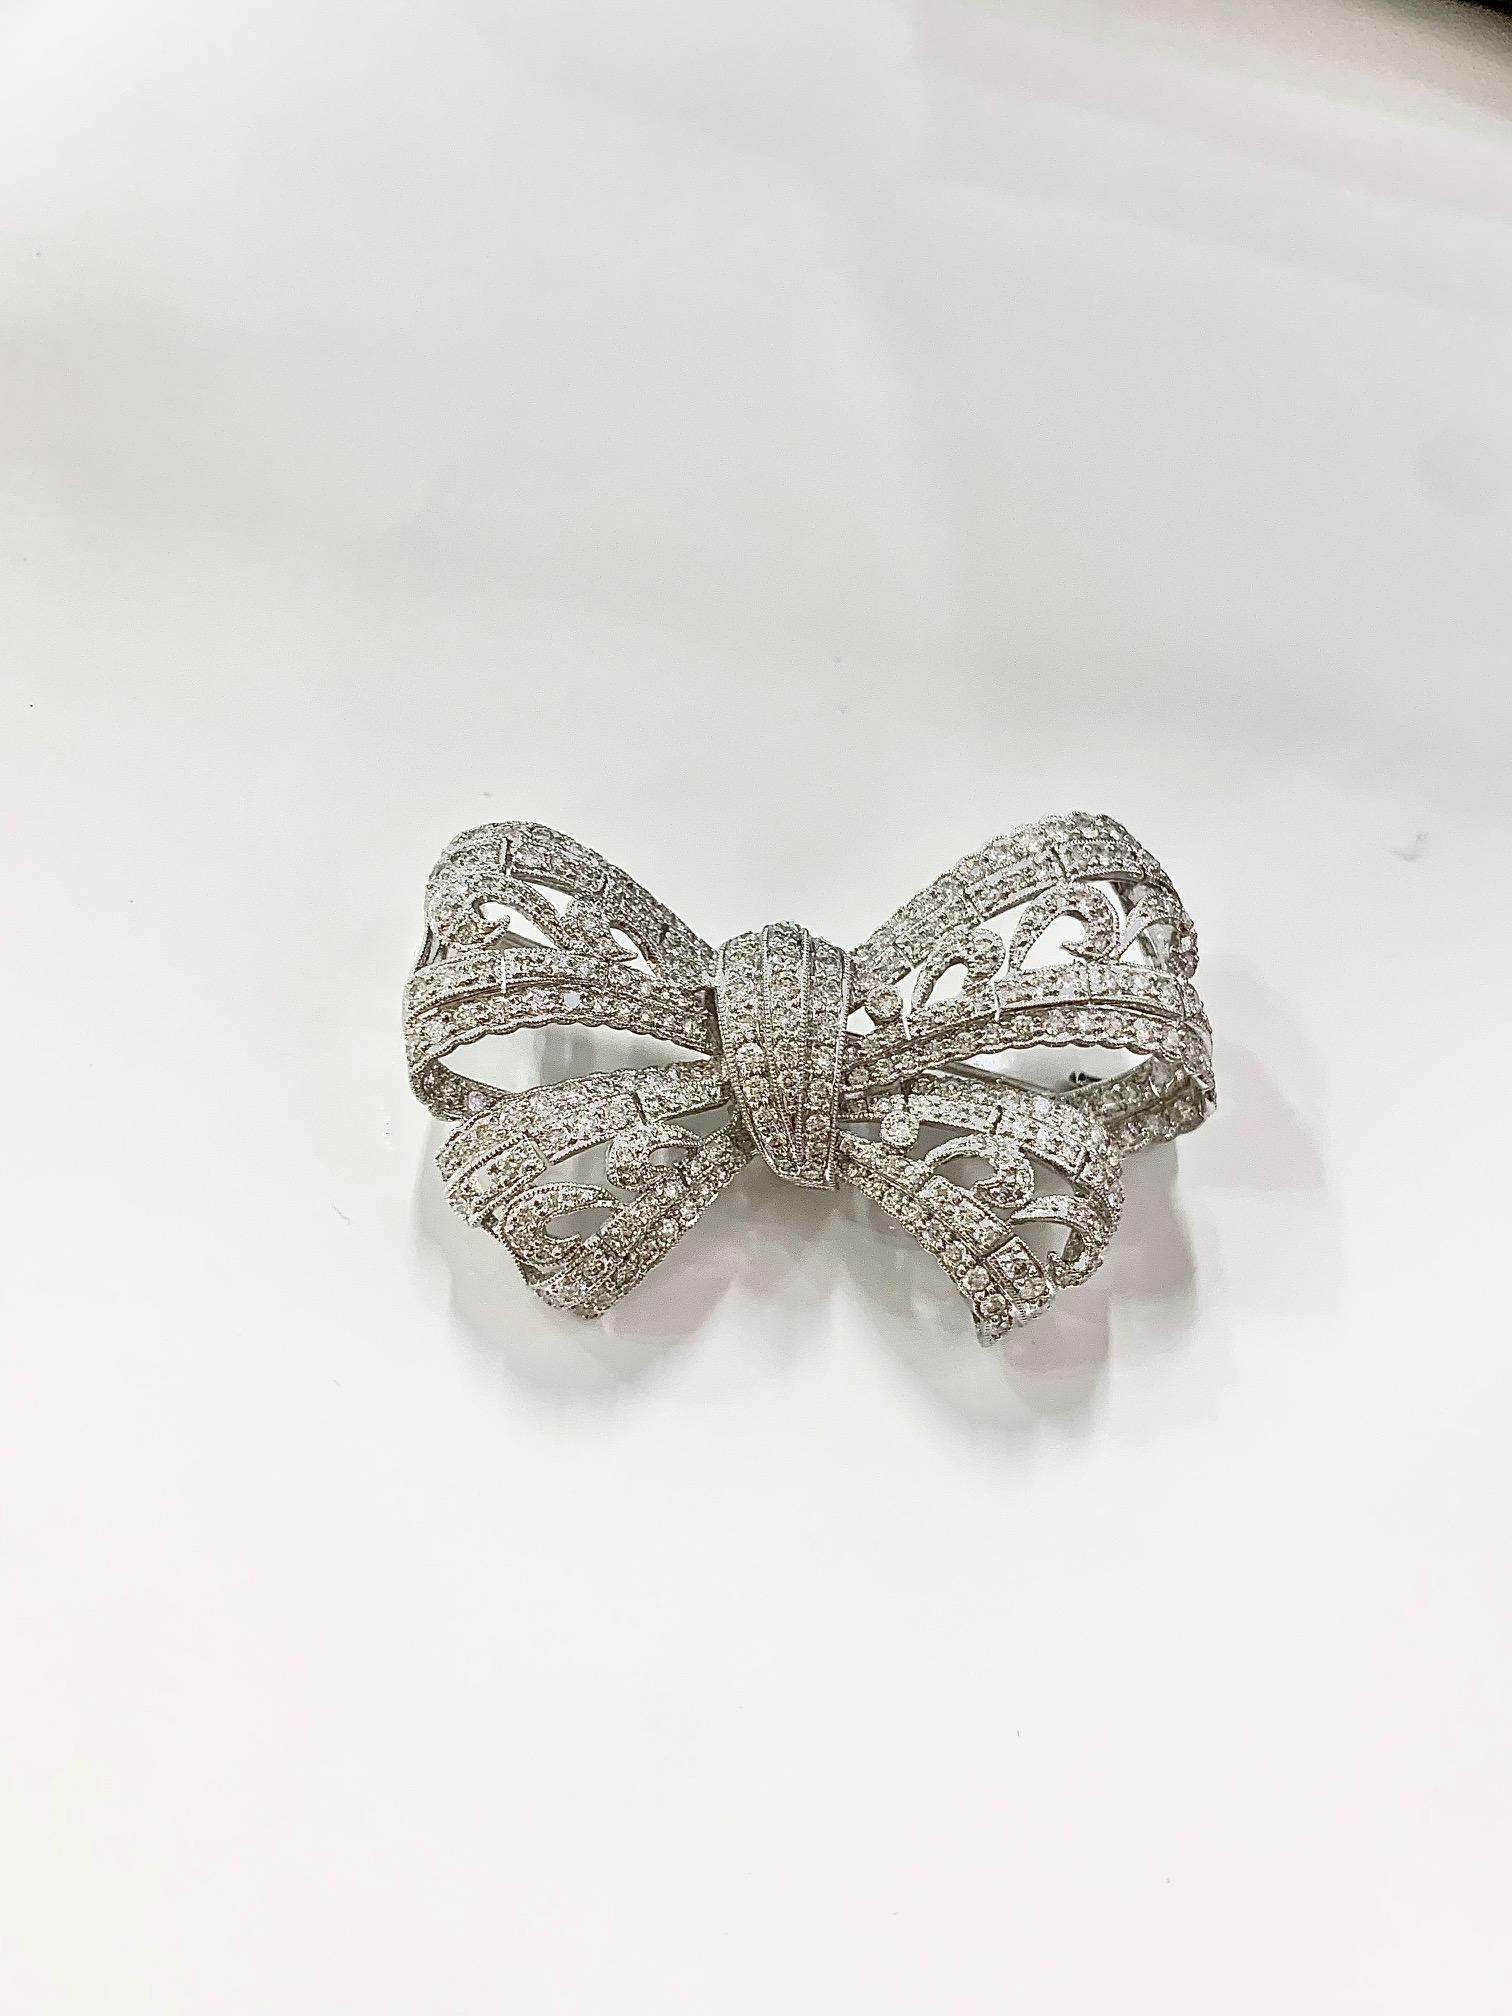 Collectors Special 3.22 Carat Bead Set Diamond Bow Brooch 

Stones: Diamond
Stone Shape: Round 
Stone Carat: 3.22 Carat 
Stone Setting Style: Bead Set 
Brooch: 18K White Gold 
Brooch Dimensions: 2 x 1.5 Inch
